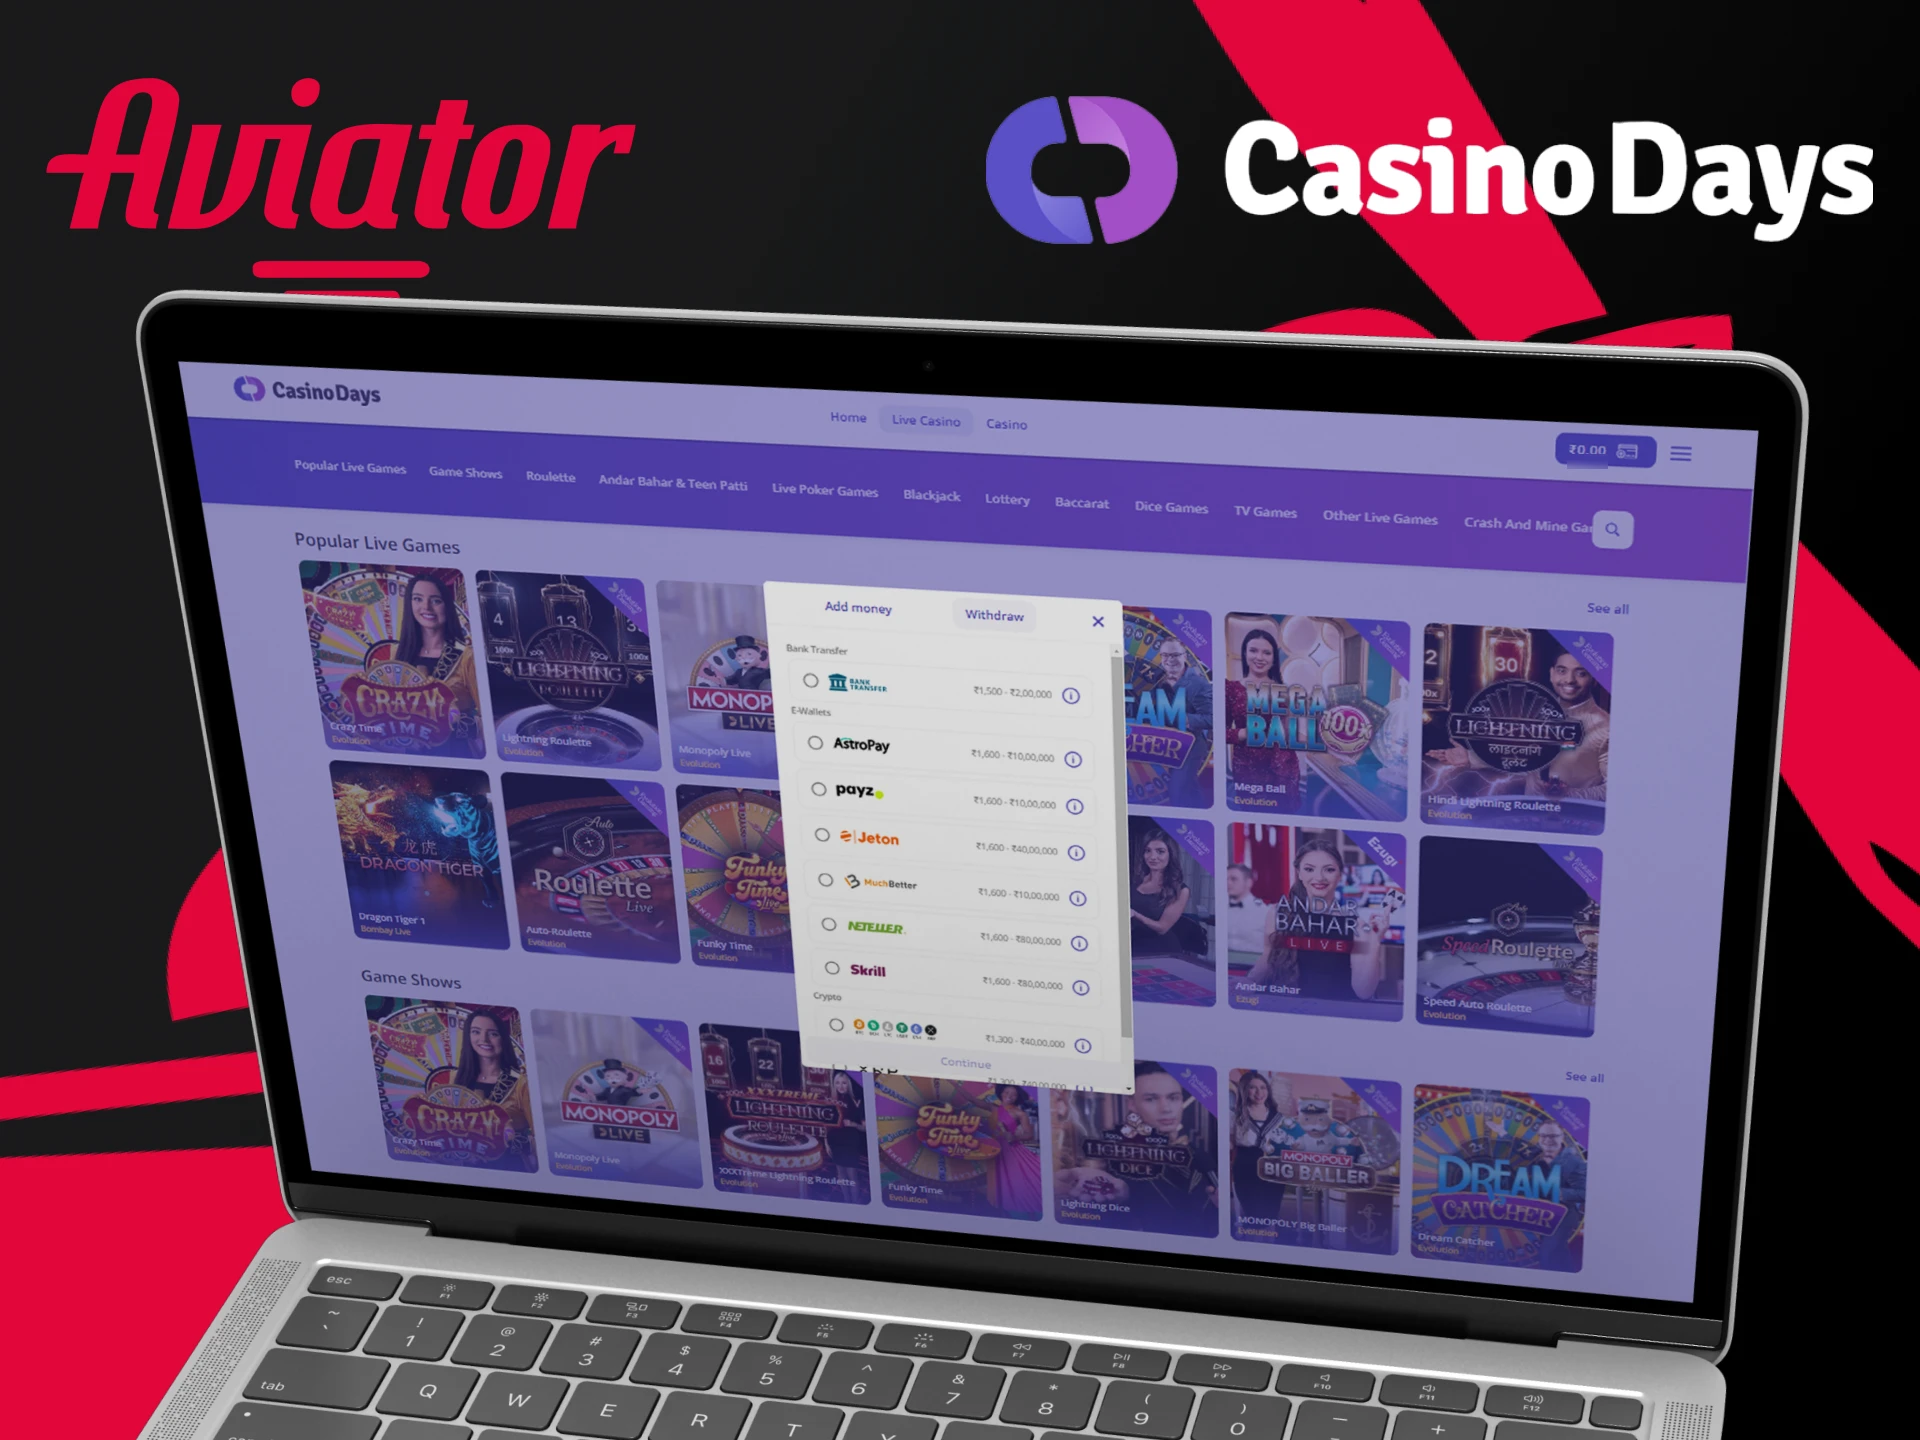 At Casino Days you can play Aviator game and withdraw your winnings.